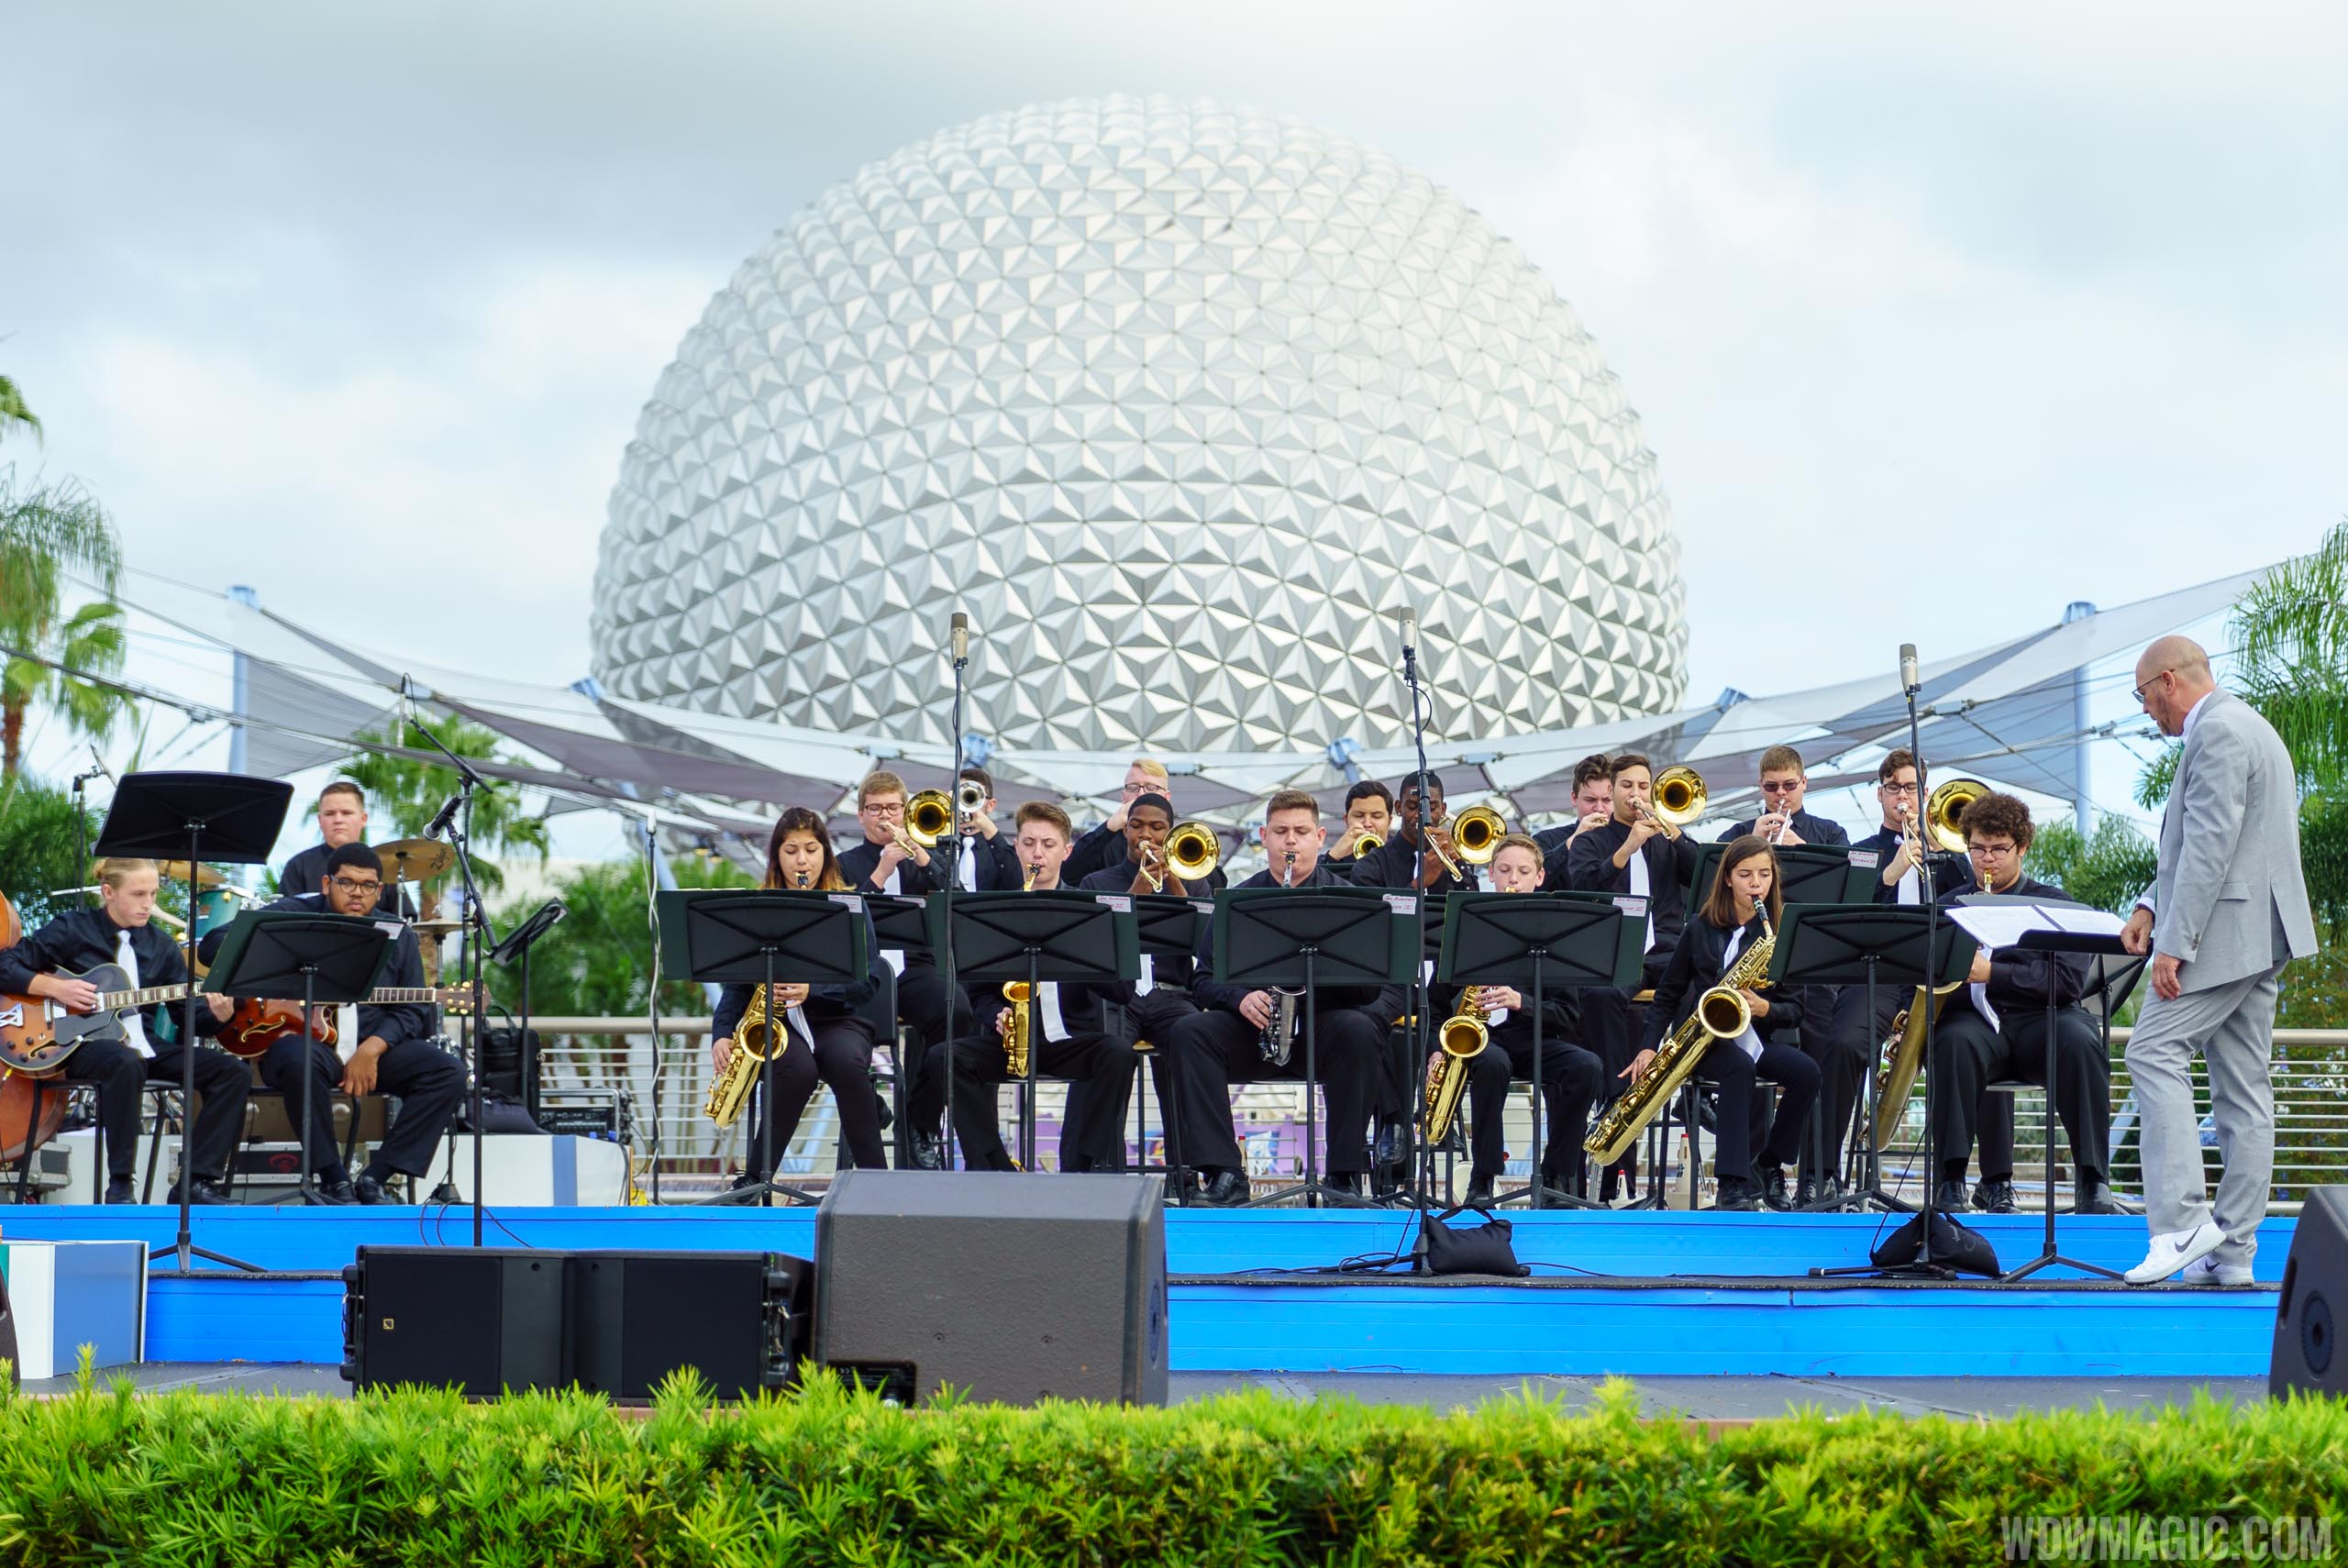 Our thoughts on Epcot's International Festival of the Arts